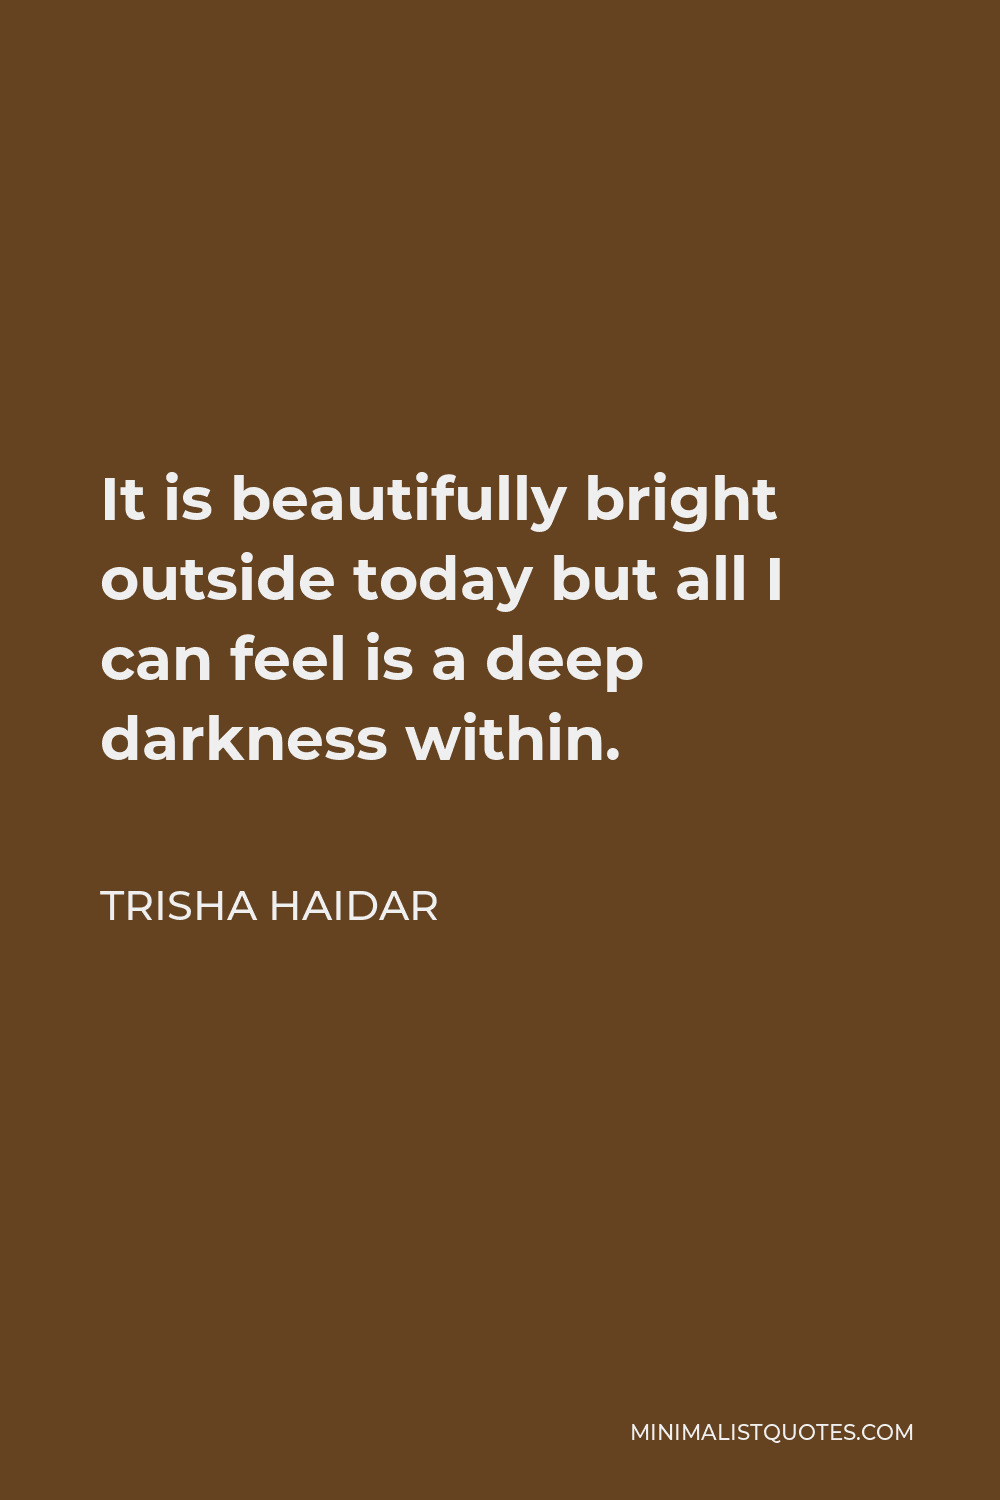 Trisha Haidar Quote - It is beautifully bright outside today but all I can feel is a deep darkness within.